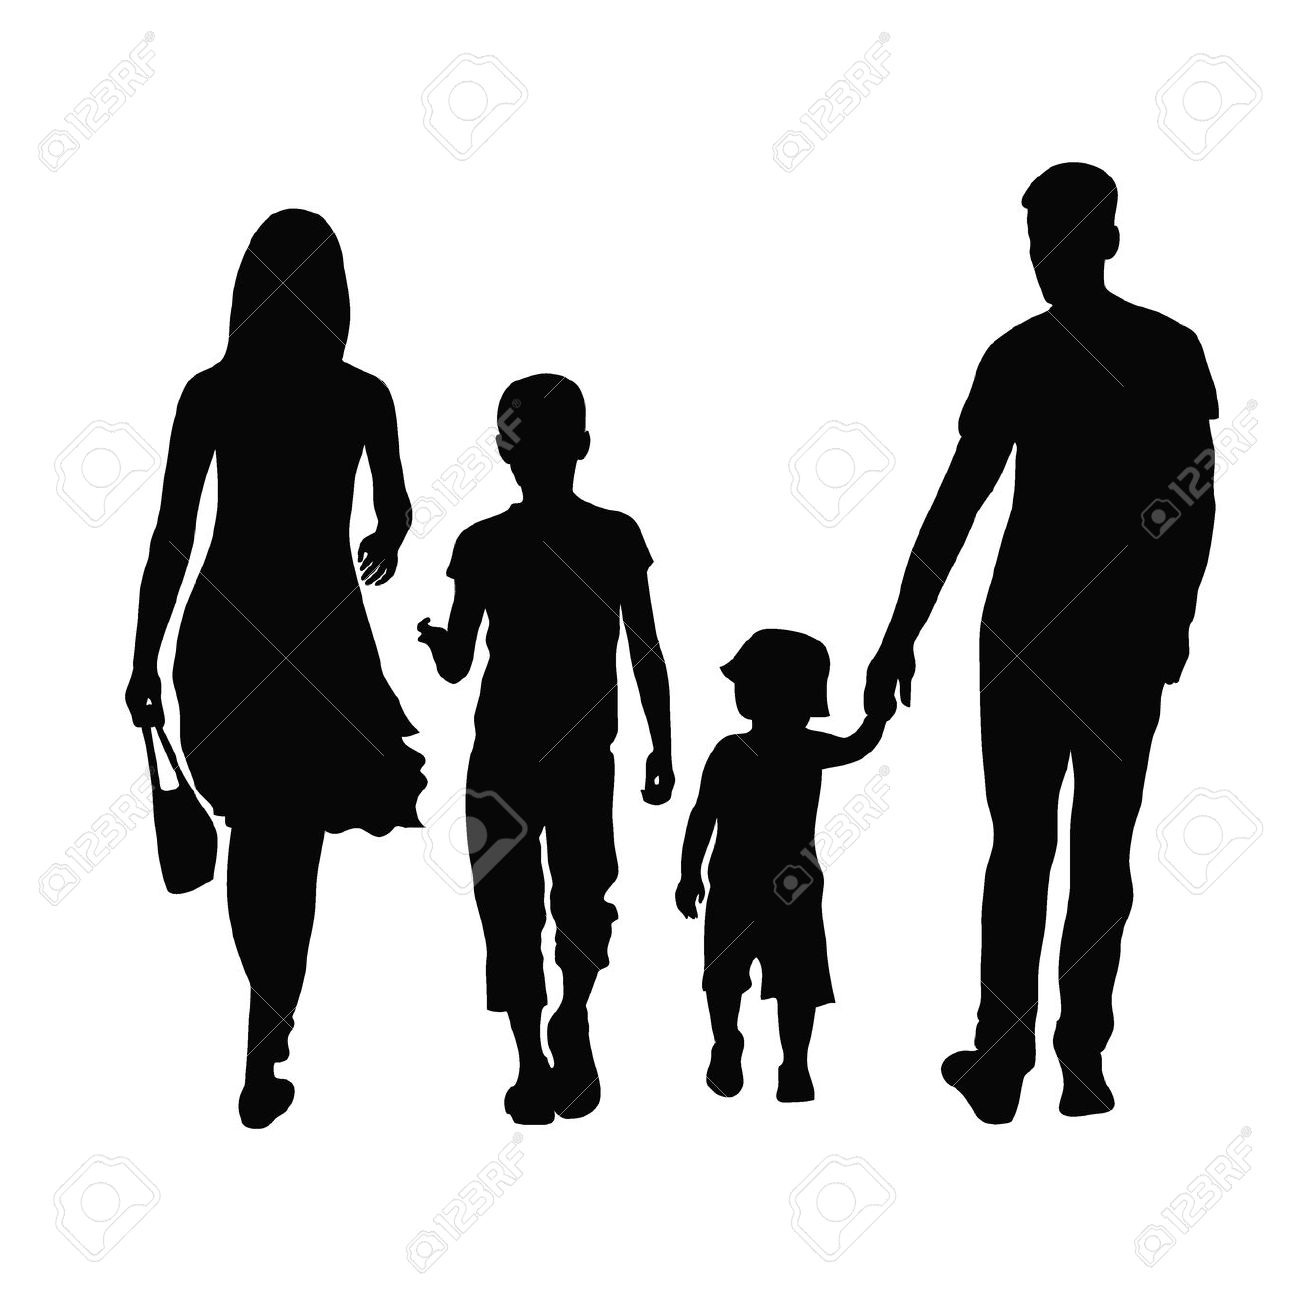 Family Of Five Silhouette at GetDrawings.com | Free for personal use